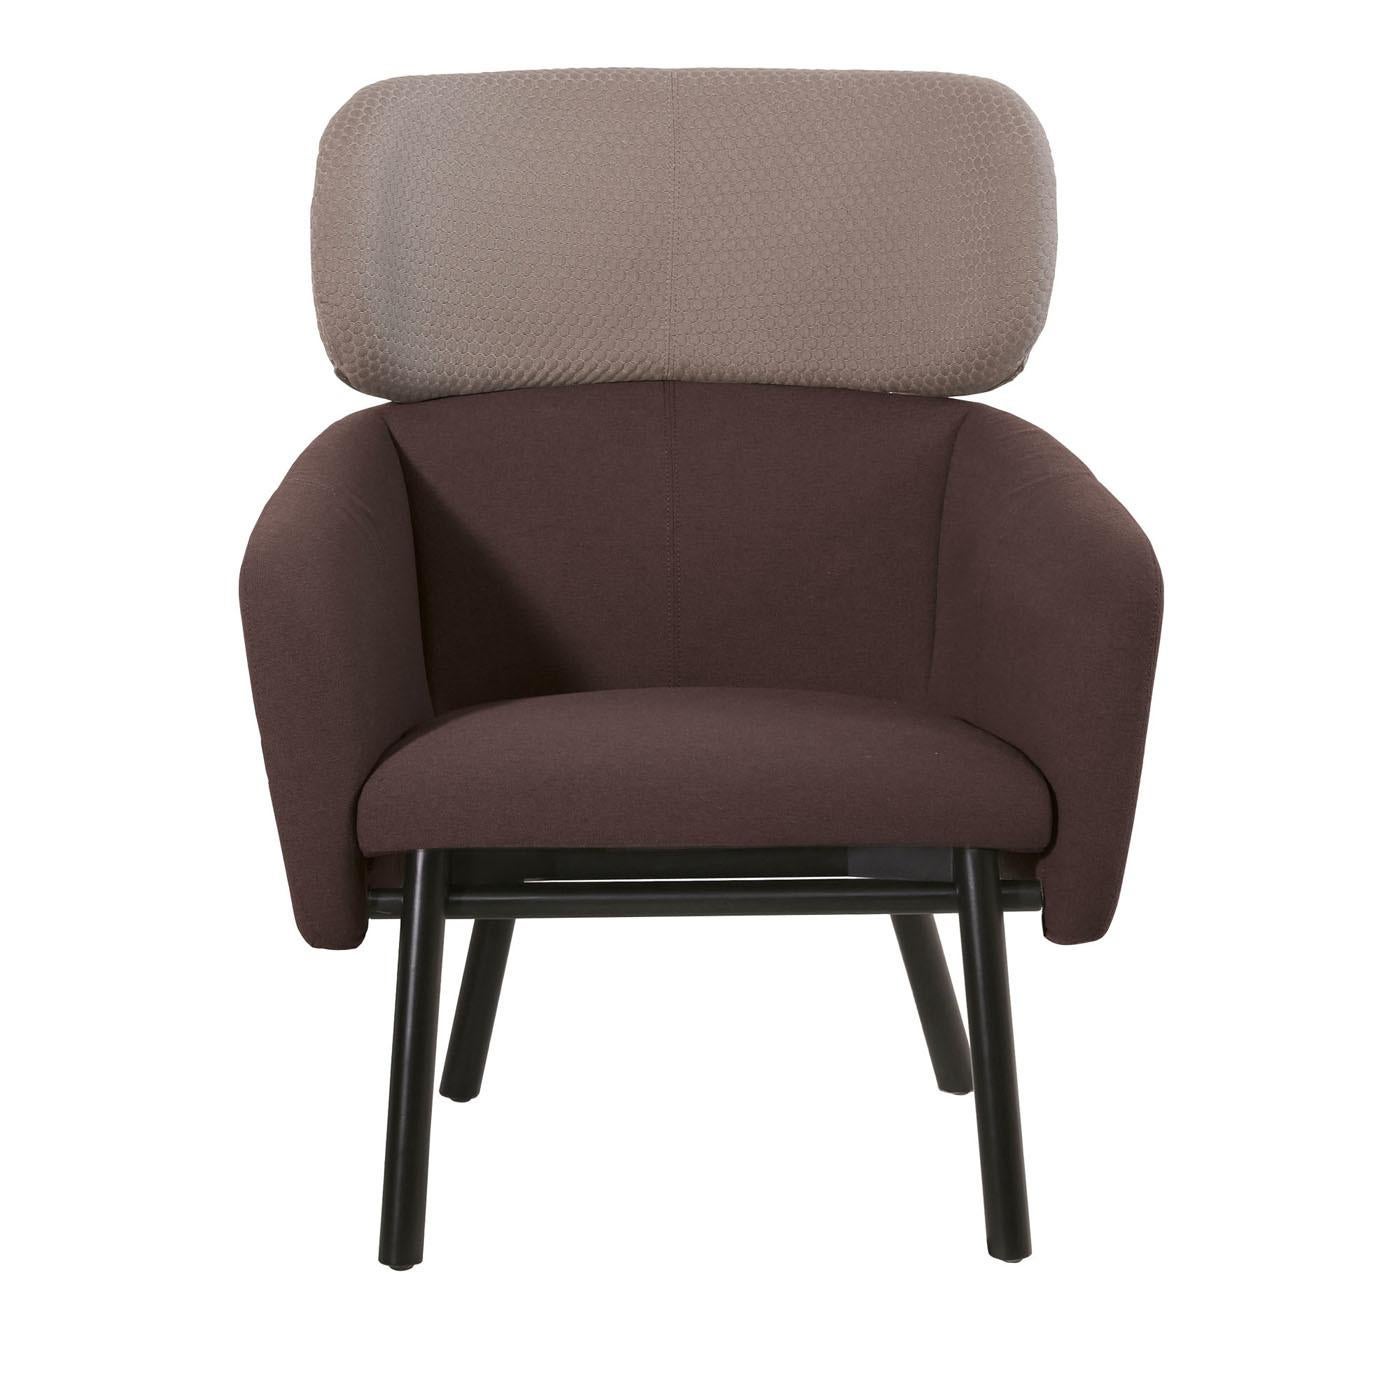 This exquisite armchair is a stunning piece of functional decor that will infuse any living or dining room with great sophistication and refined craftsmanship. Exuding comfort, it features a generous and embracing seat, arms and backrest with an